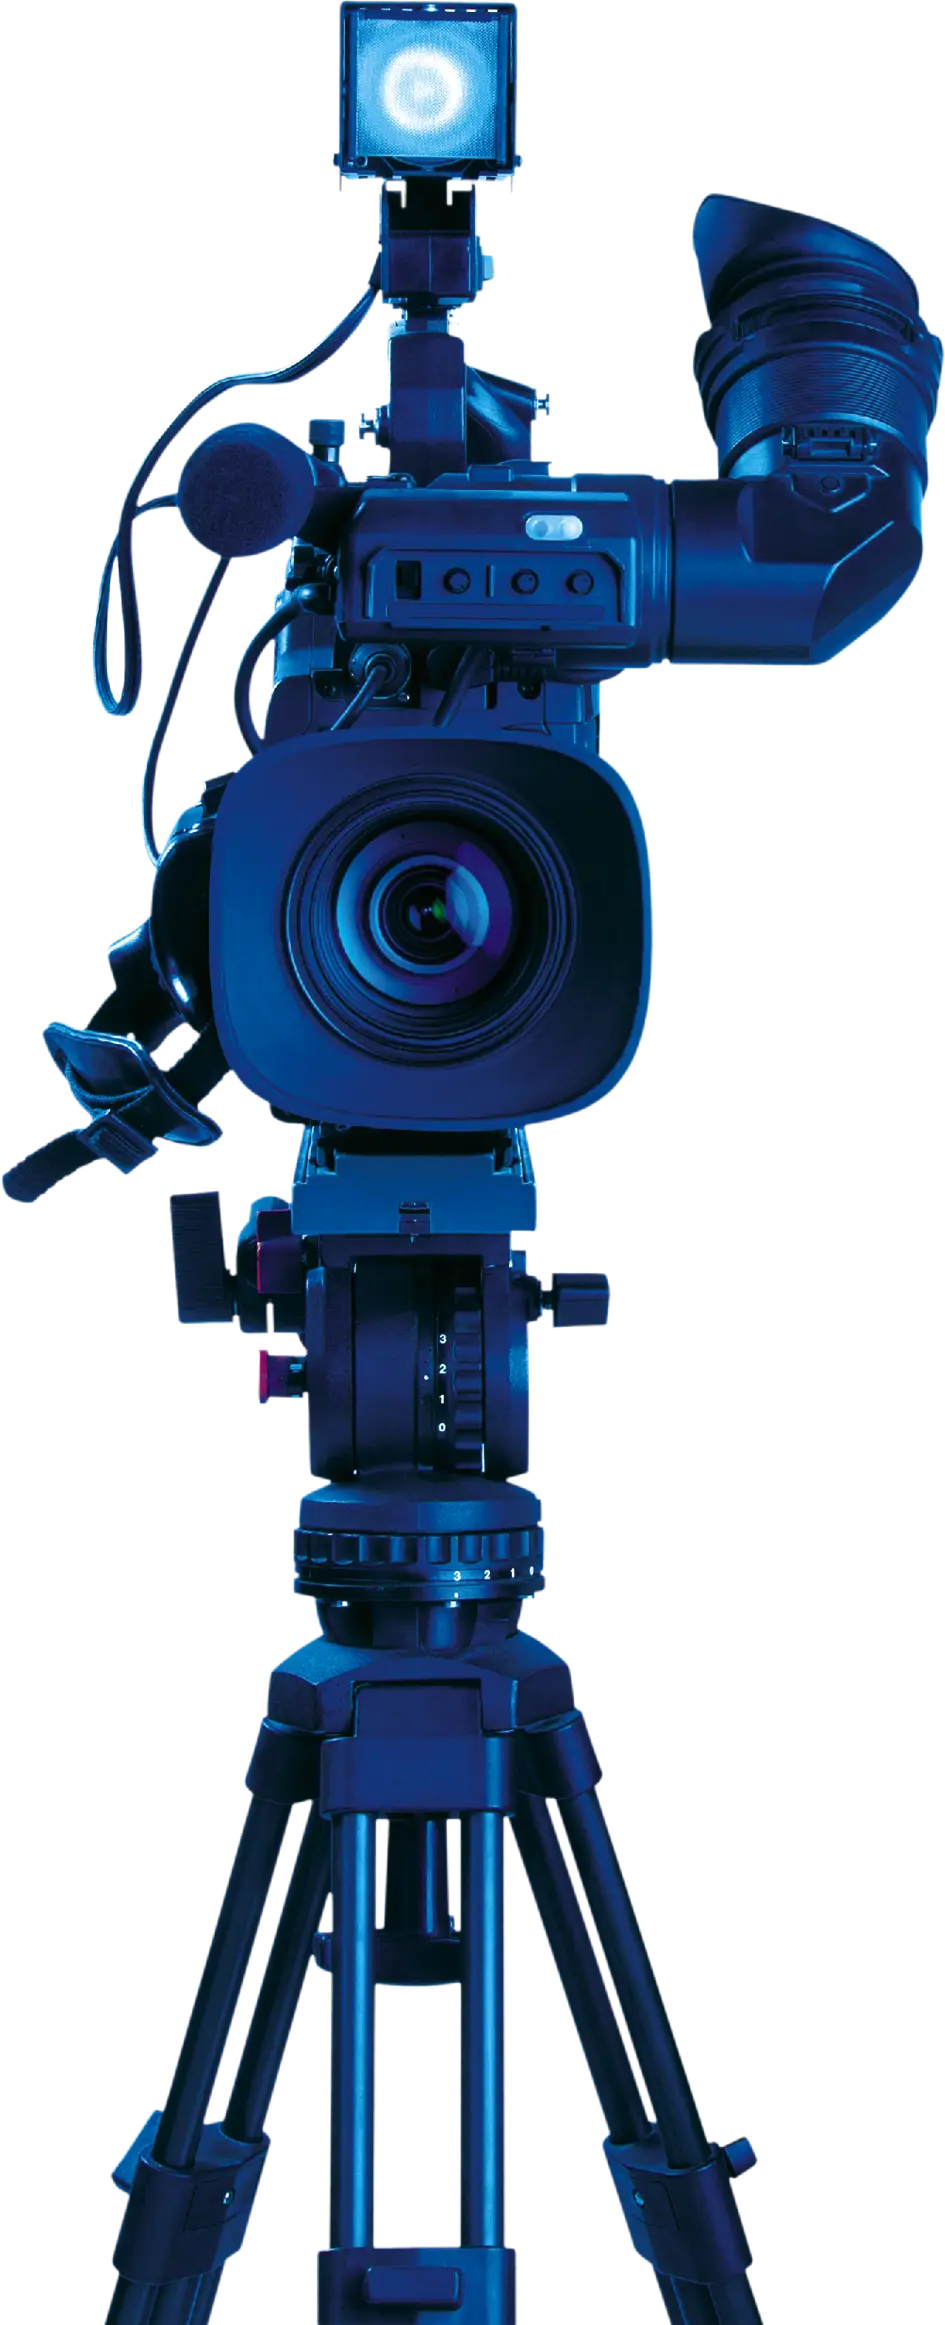 Video camera with blue overlay